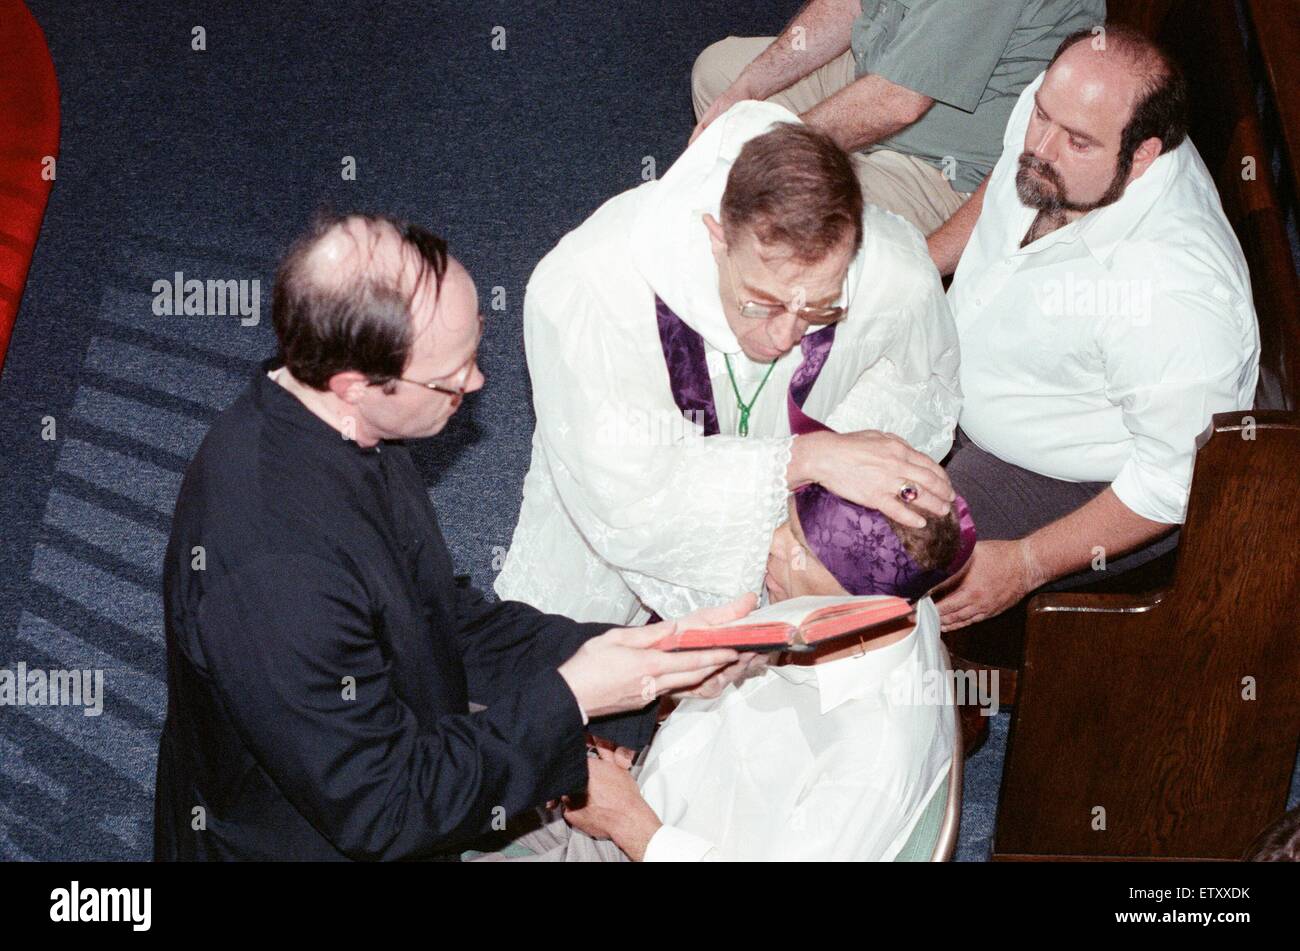 William Ramsey from Southend-on-Sea in the UK being exorcised by Bishop Robert McKenna at 'Our Lady of the Rosary Chapel' in Monroe, Fairfield County, Connecticut, USA. 28th July 1989. Stock Photo